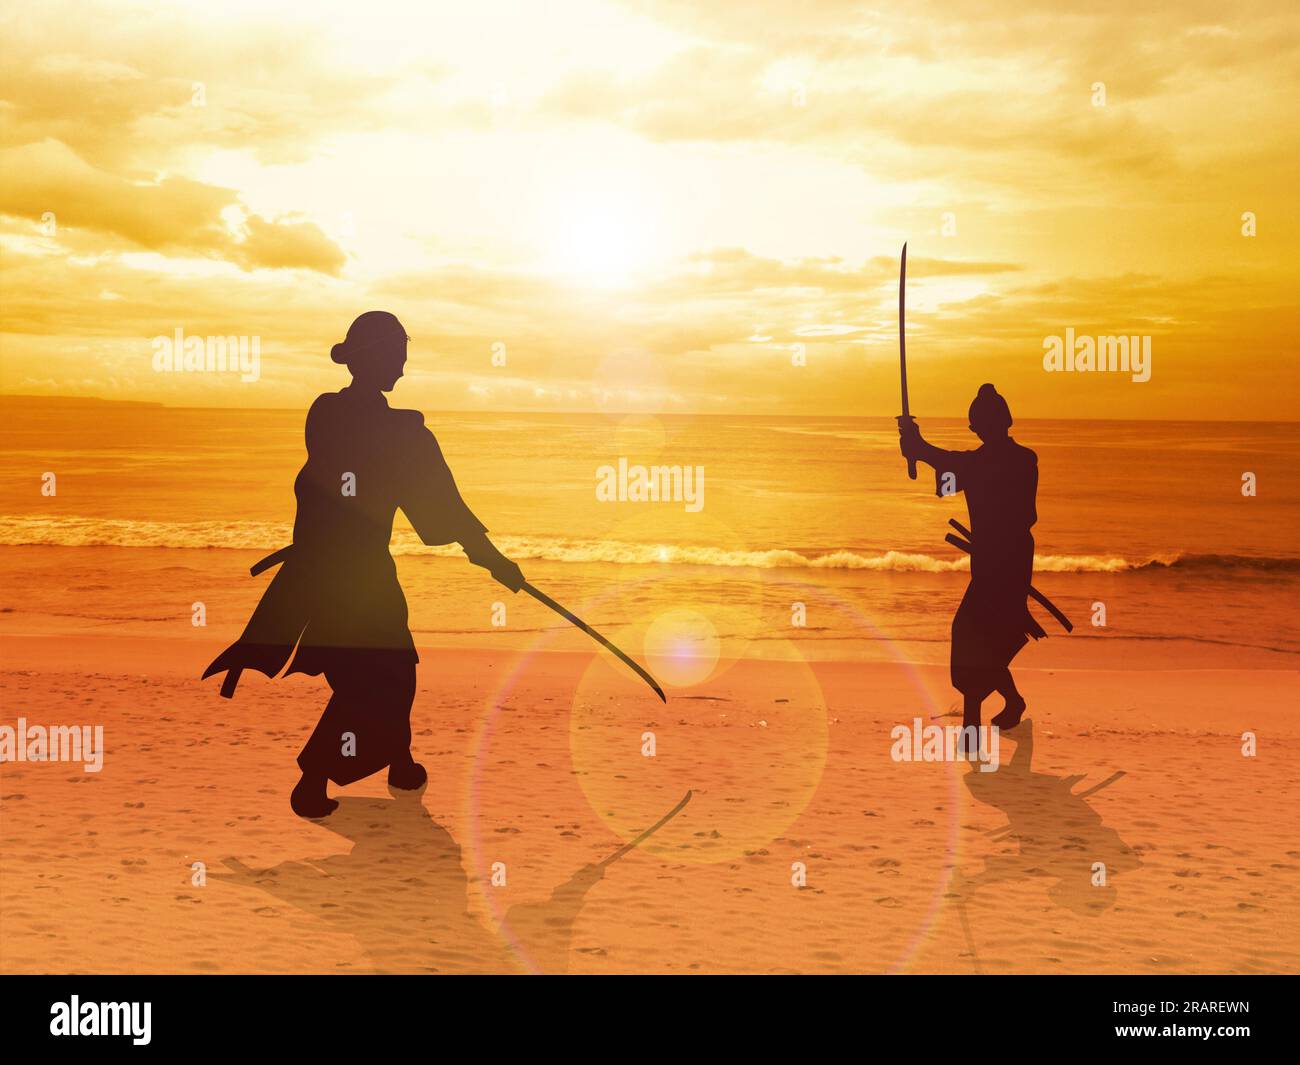 Two Samurai in duel stance facing each other on the beach Stock Photo